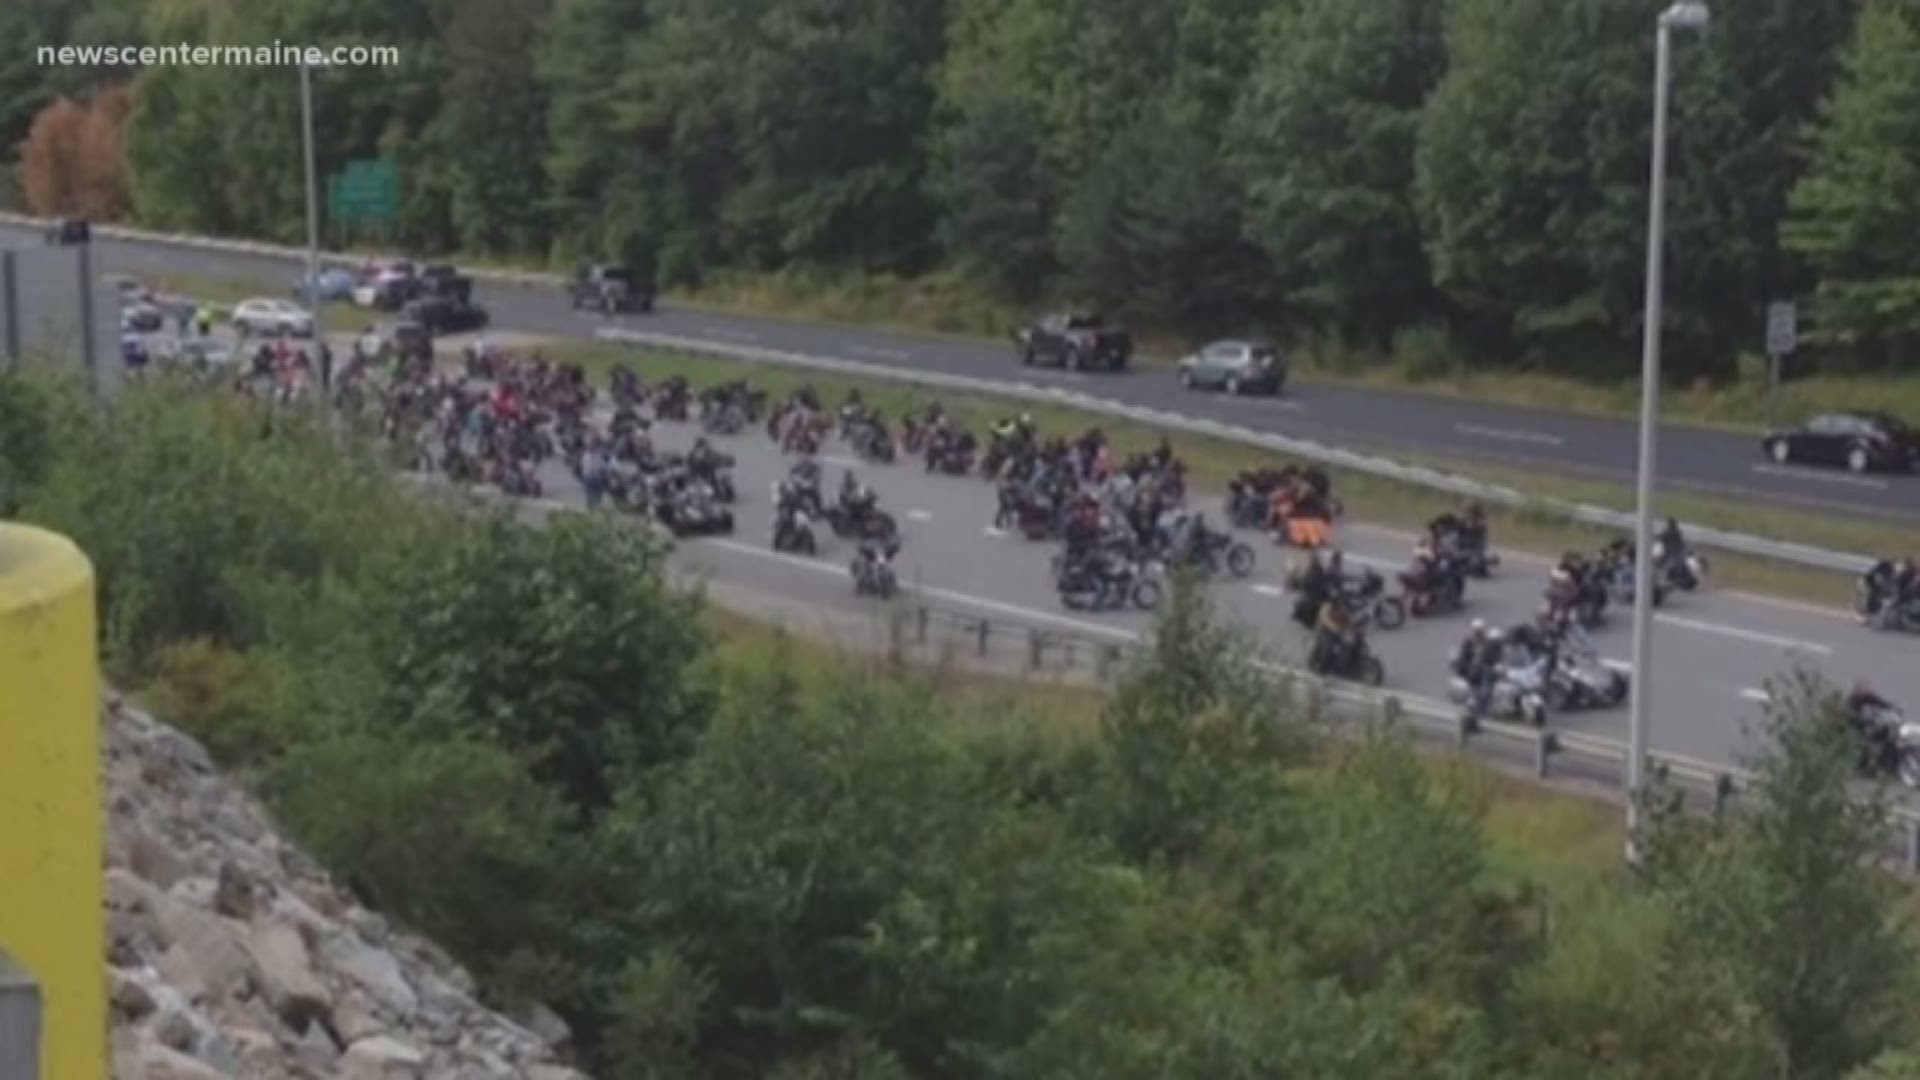 A report from the NTSB reveals new safety details about the toy run accident death from 2017.